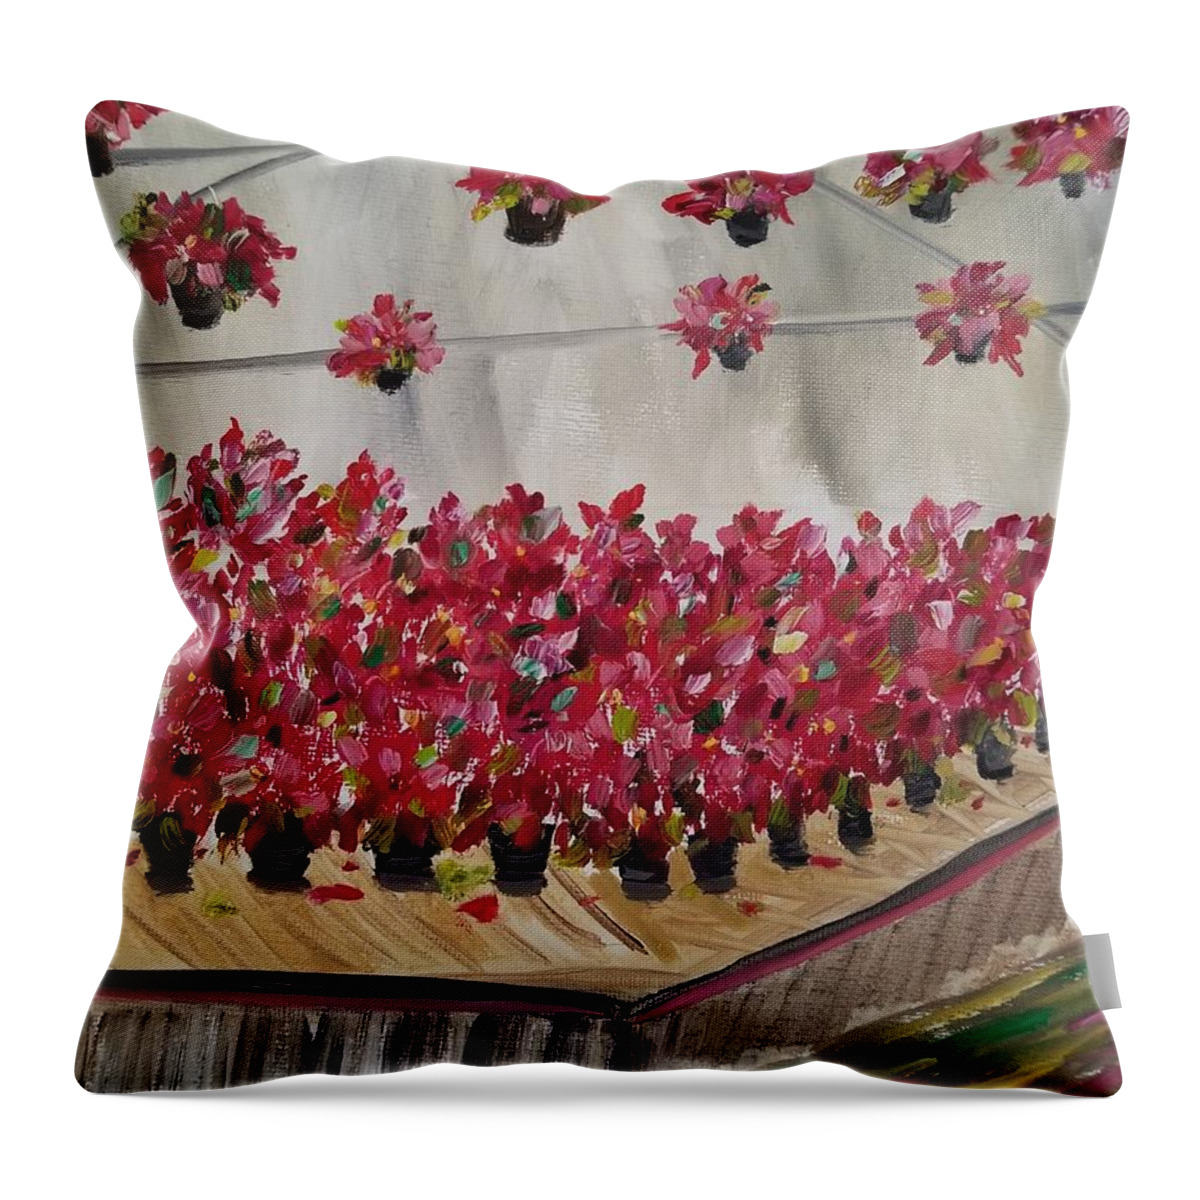 Poinsettia Throw Pillow featuring the painting Poinsettia Greenhouse by Judith Rhue